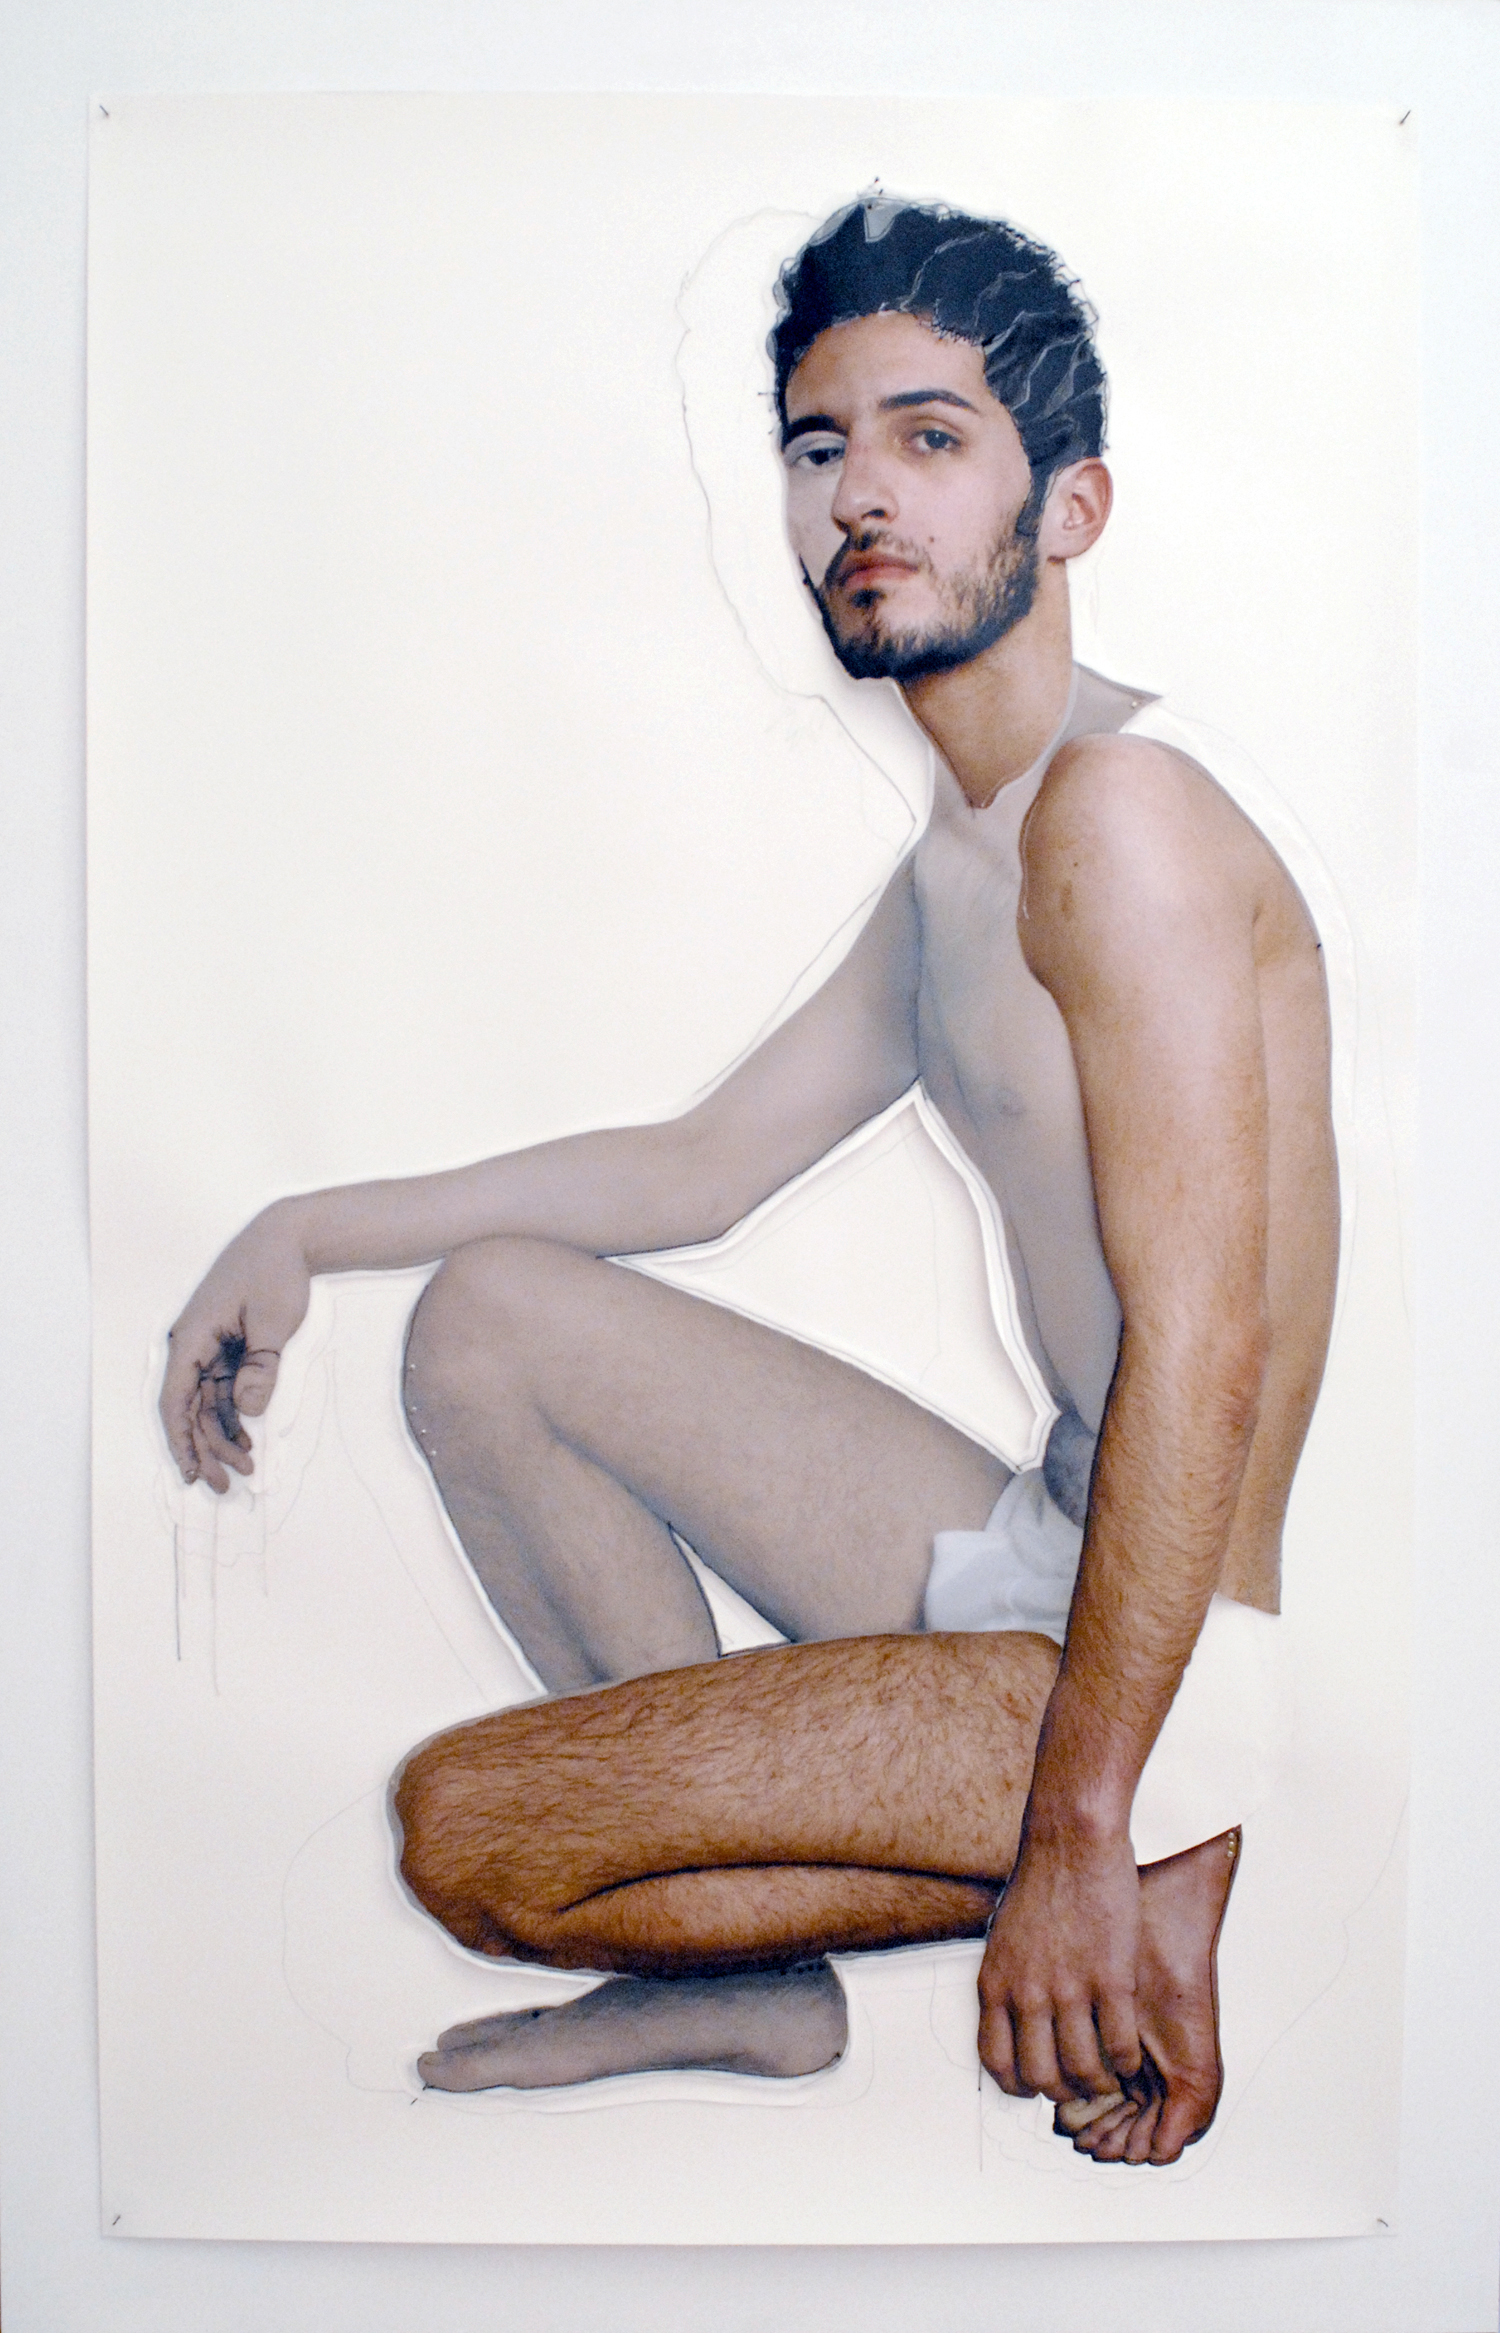 Germán Gómez, Drawn VI (from the Drawn series), 2007. Mixed media drawing, 72⅛ x 47½ inches. Courtesy of 21c Museum Hotel